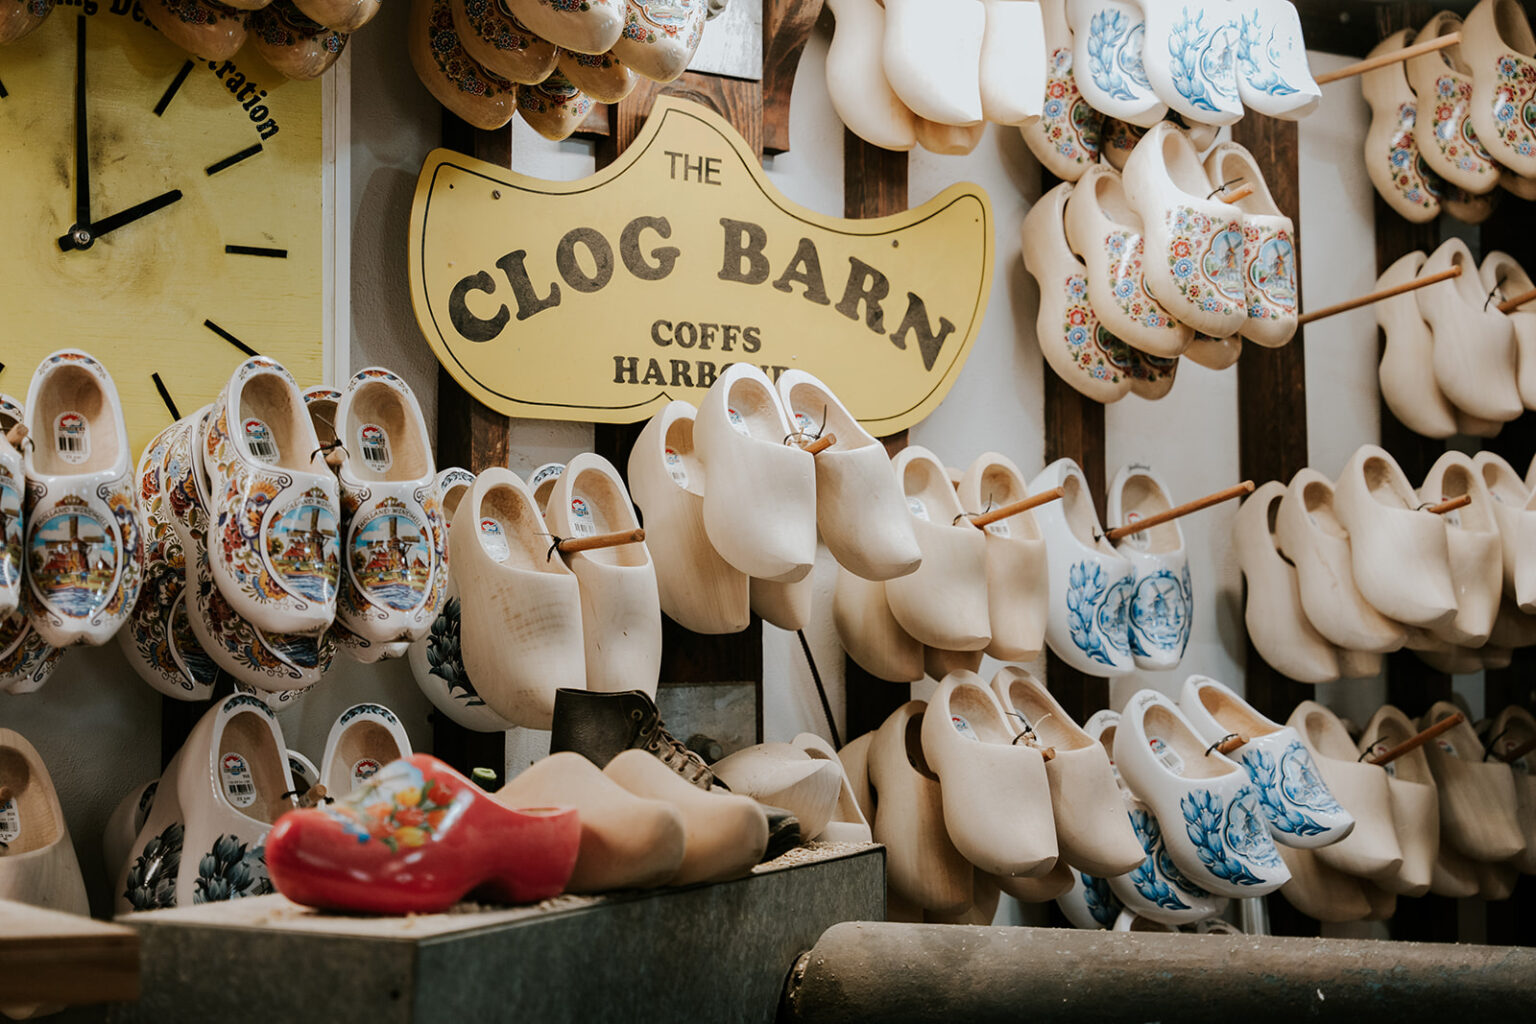 Make Sure You Grab A Selfie In The Giant Clogs